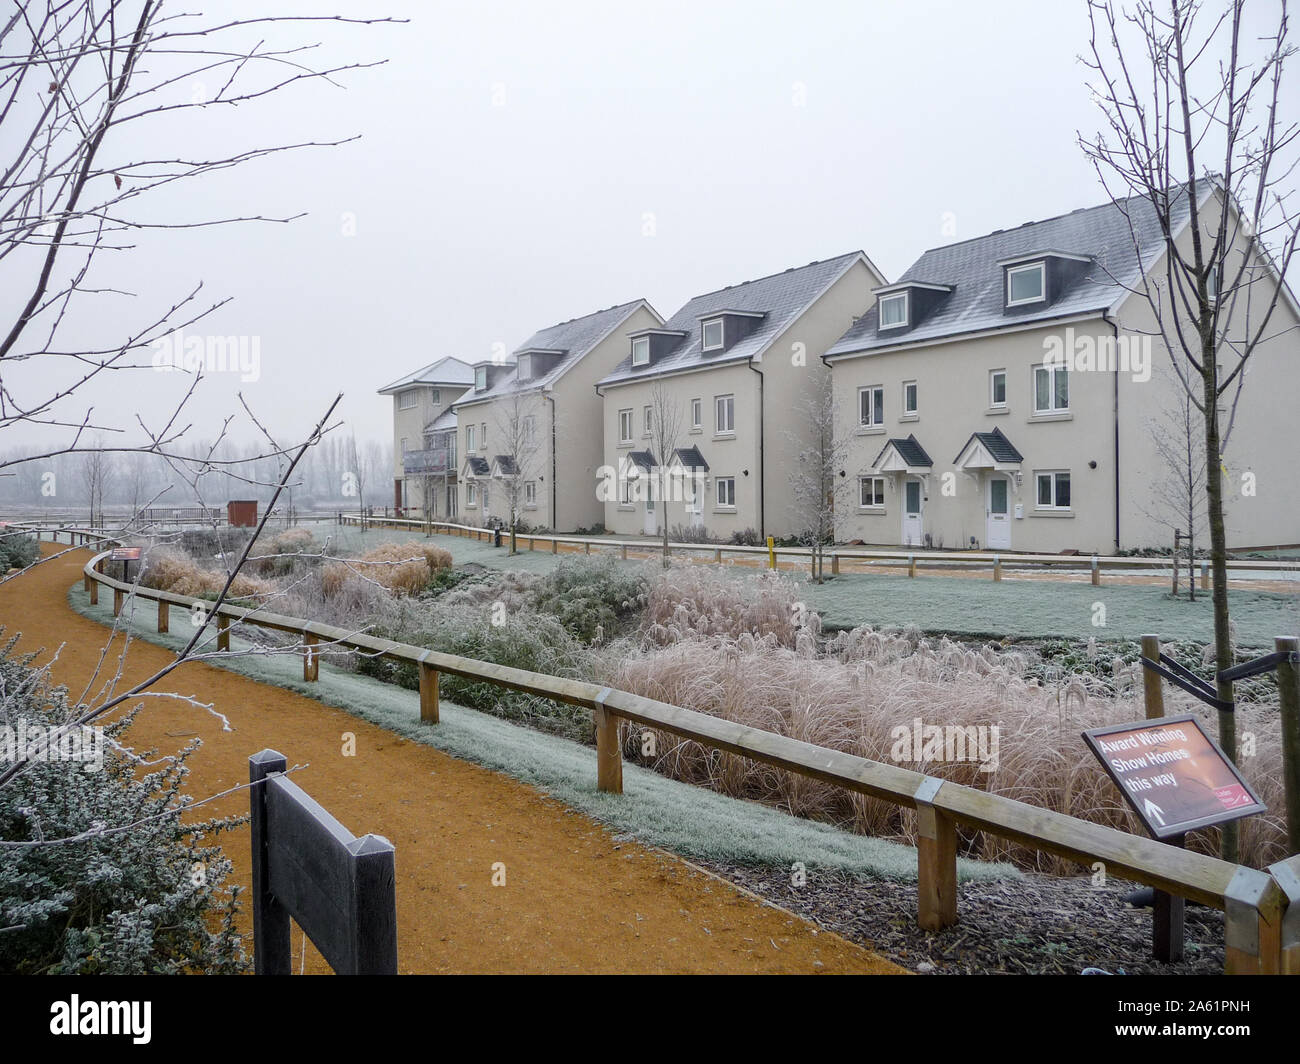 Houses on the 'reedbeds' at the Watercolour housing development between Merstham and Redhill in winter, Surrey Stock Photo